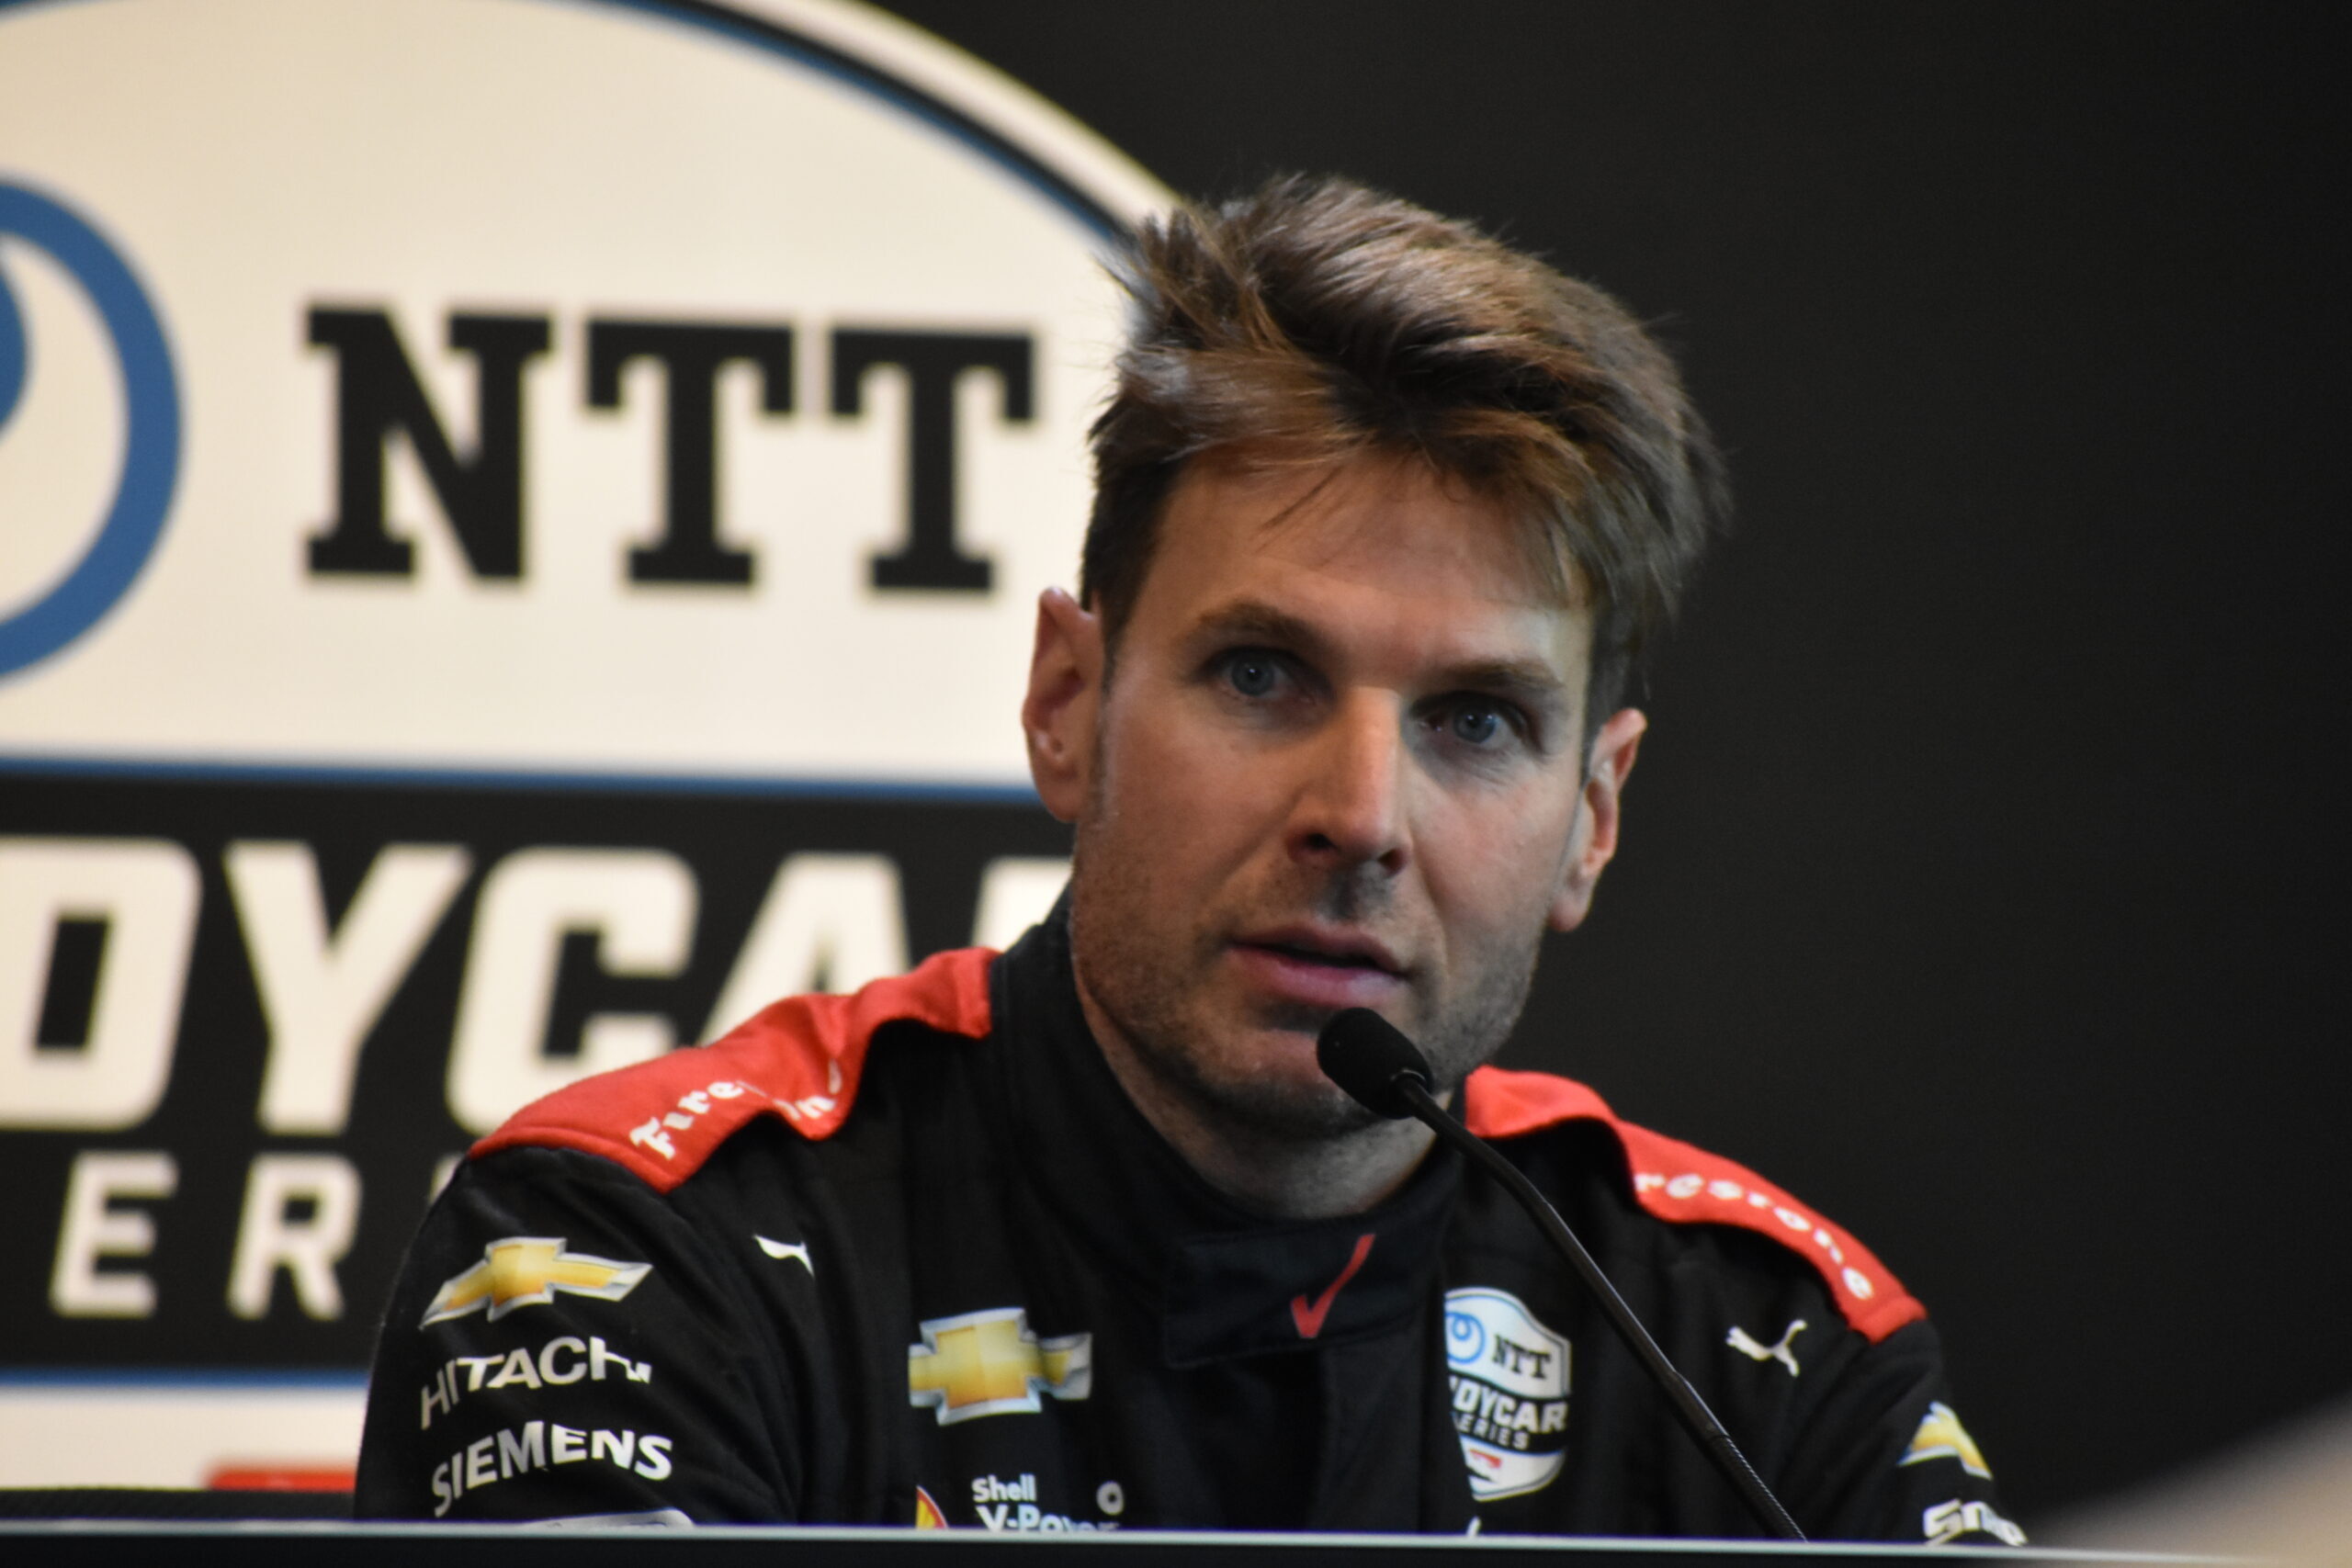 Naturally, Will Power remains one of the genuine contenders for this year's Indianapolis 500. (Photo: Luis Torres/The Podium Finish)